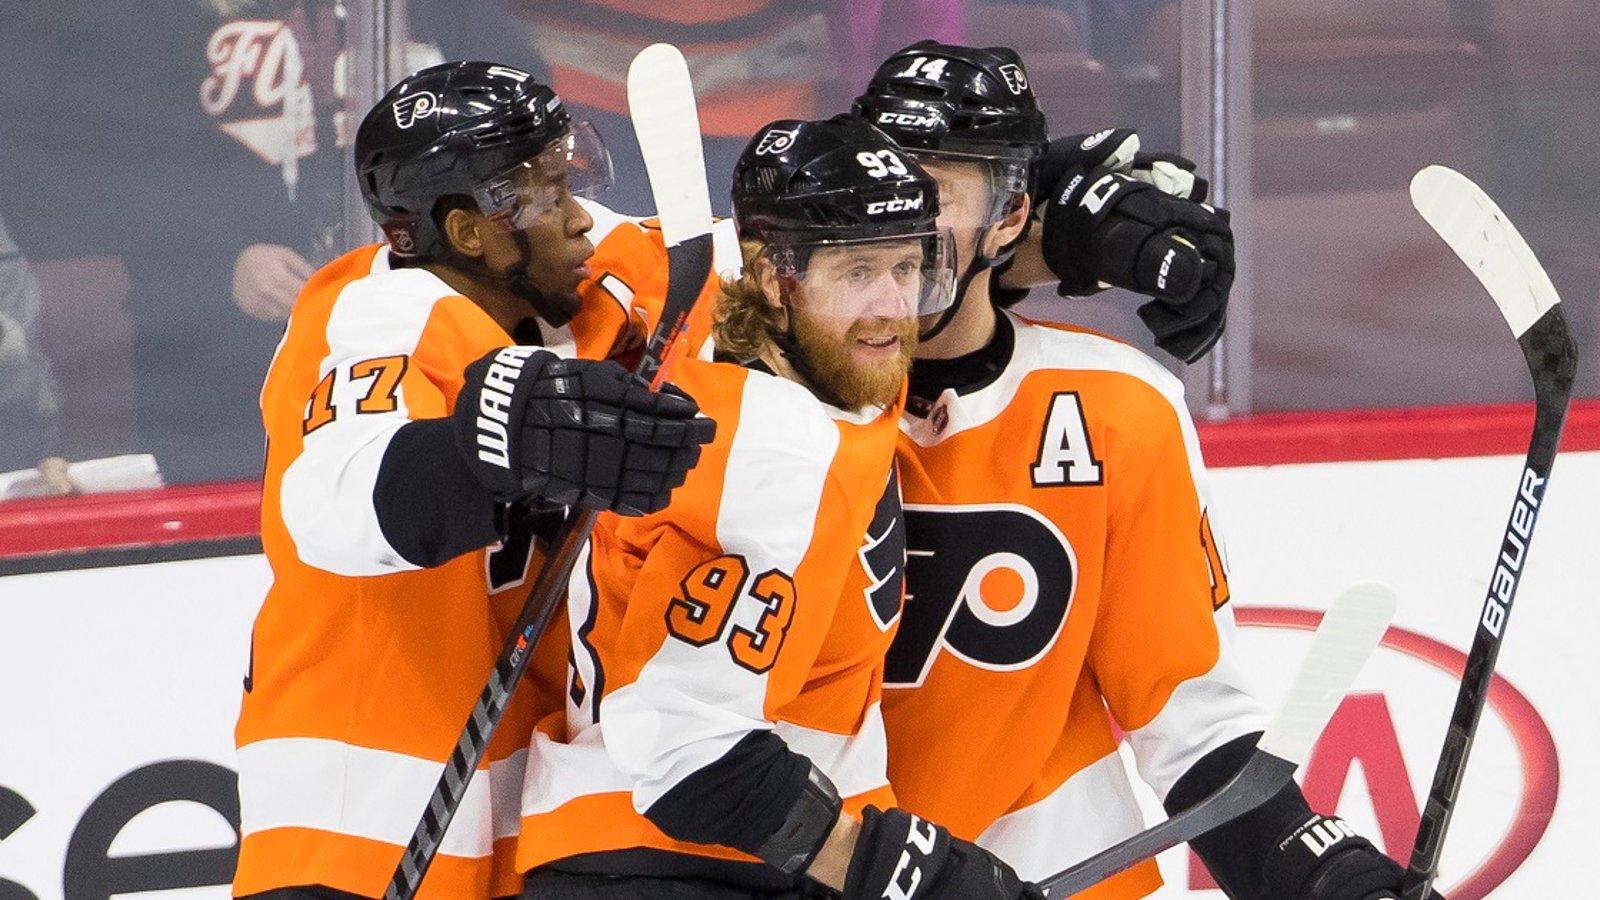 Breaking: Flyers put every player on the trading block with only 2 exceptions.